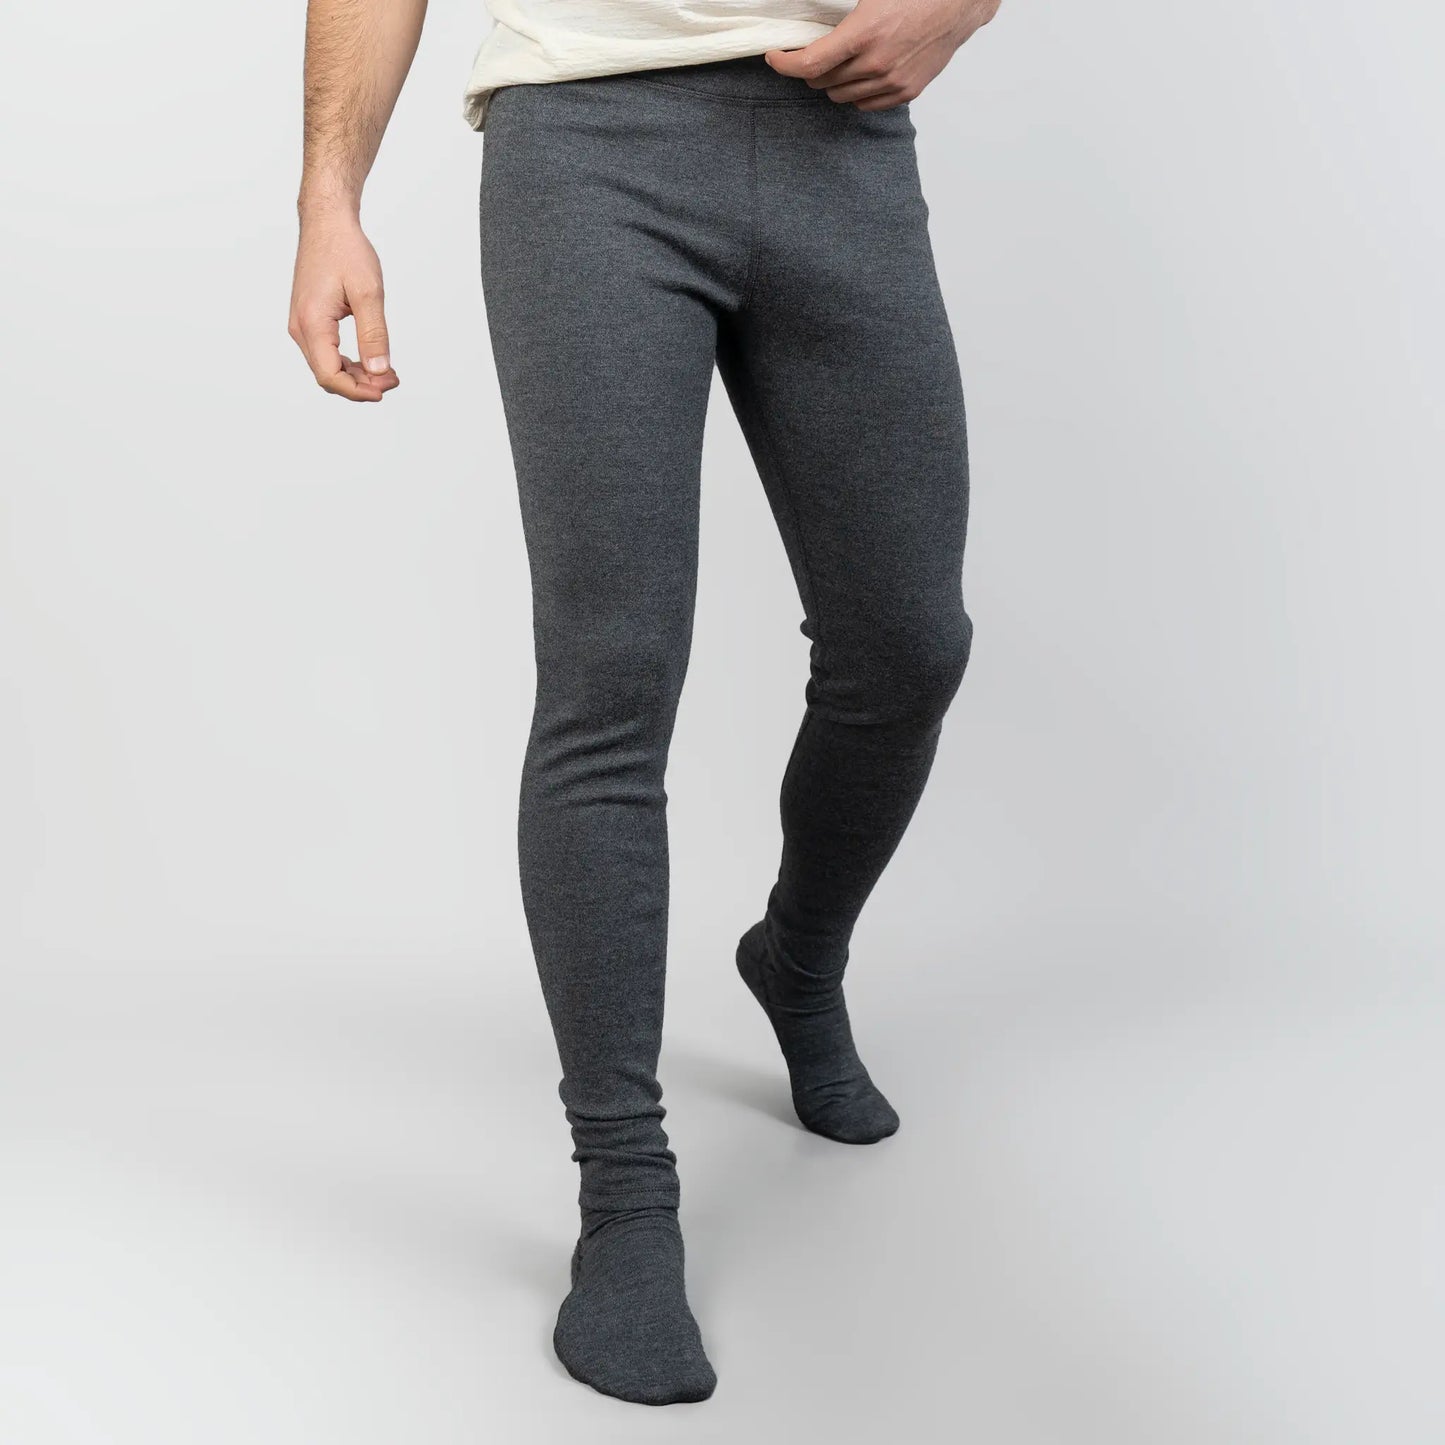 mens highly breathable leggings midweight color gray